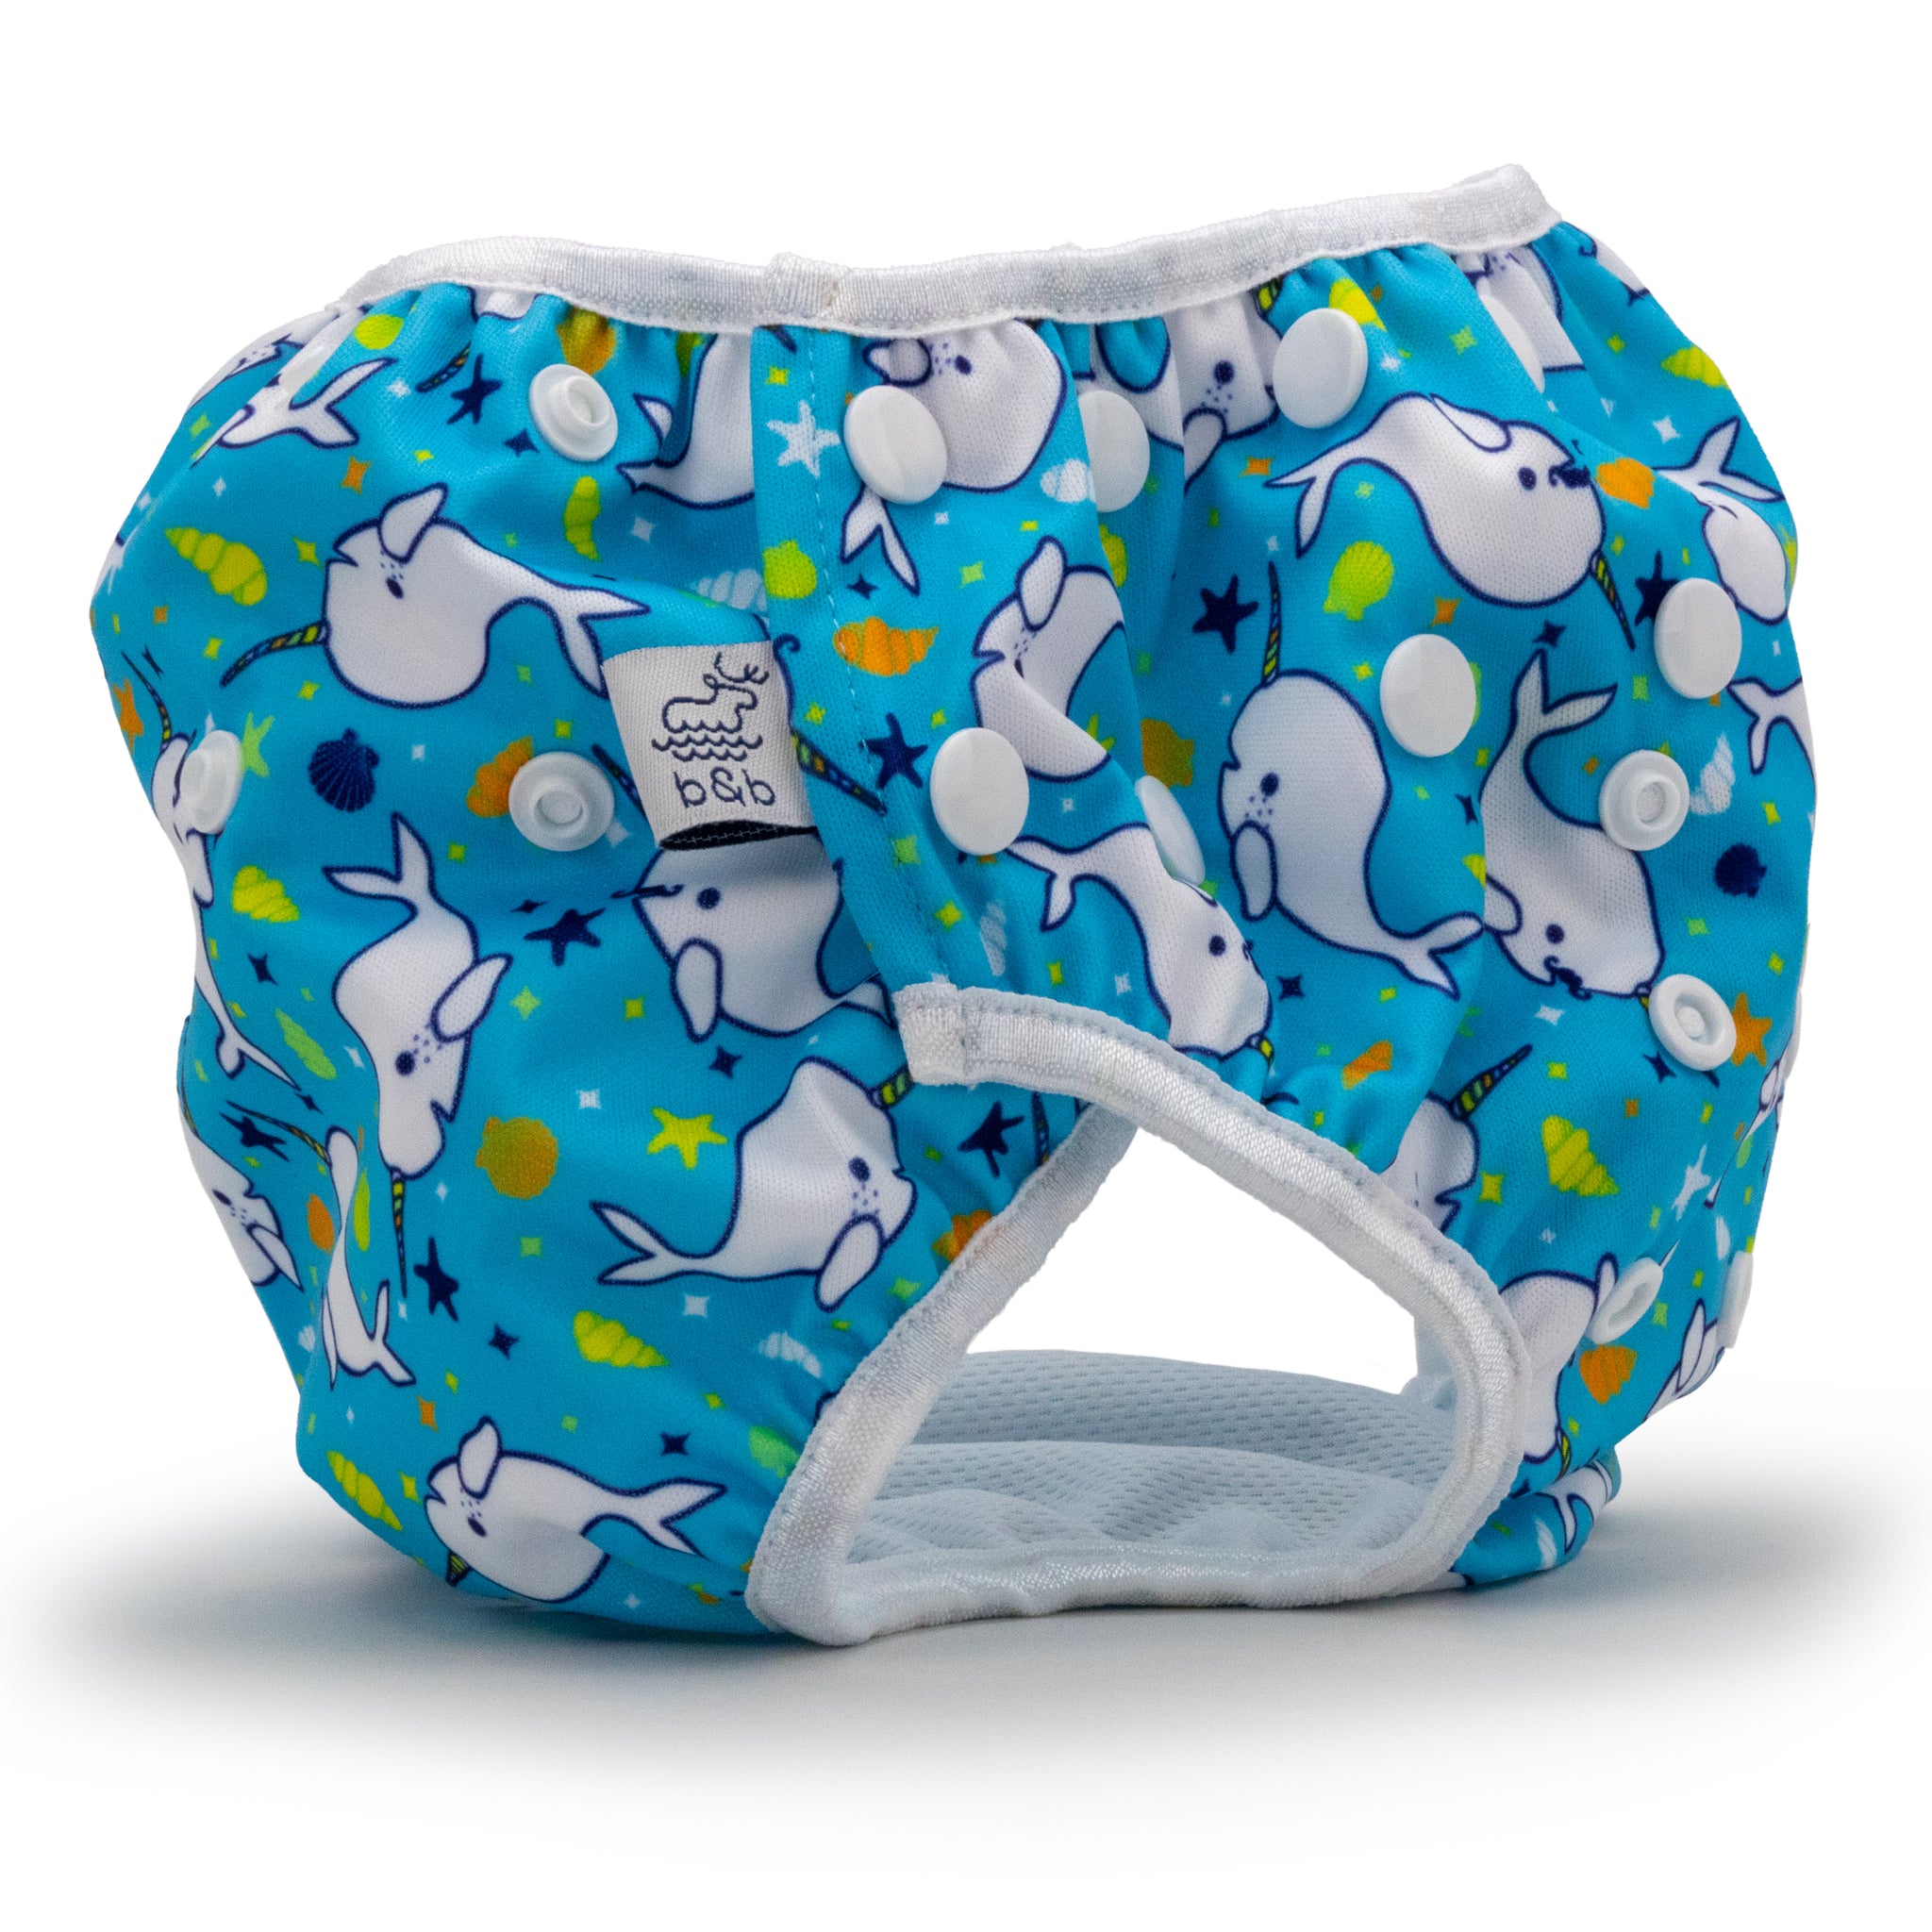 Reusable swim diaper with blue narhwal design, side view, large size.